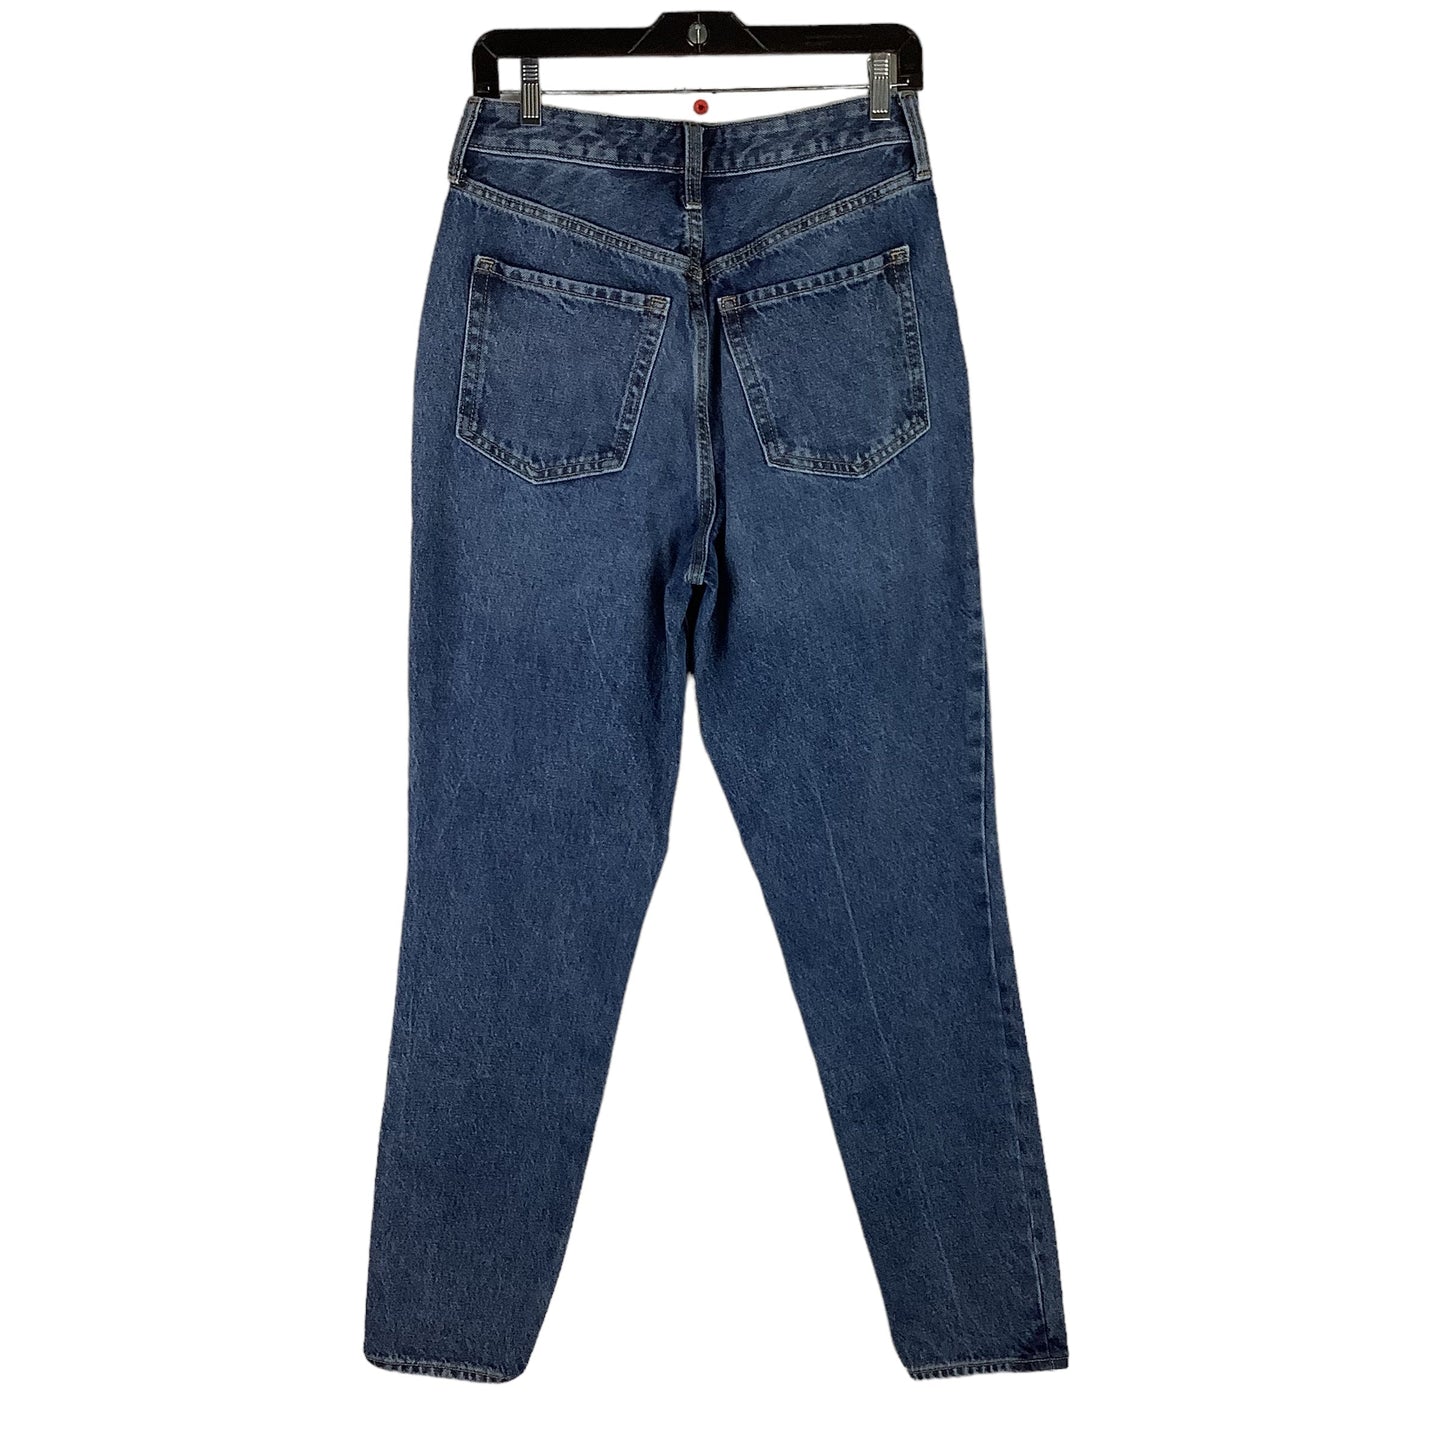 Jeans Straight By Old Navy  Size: 6 tall